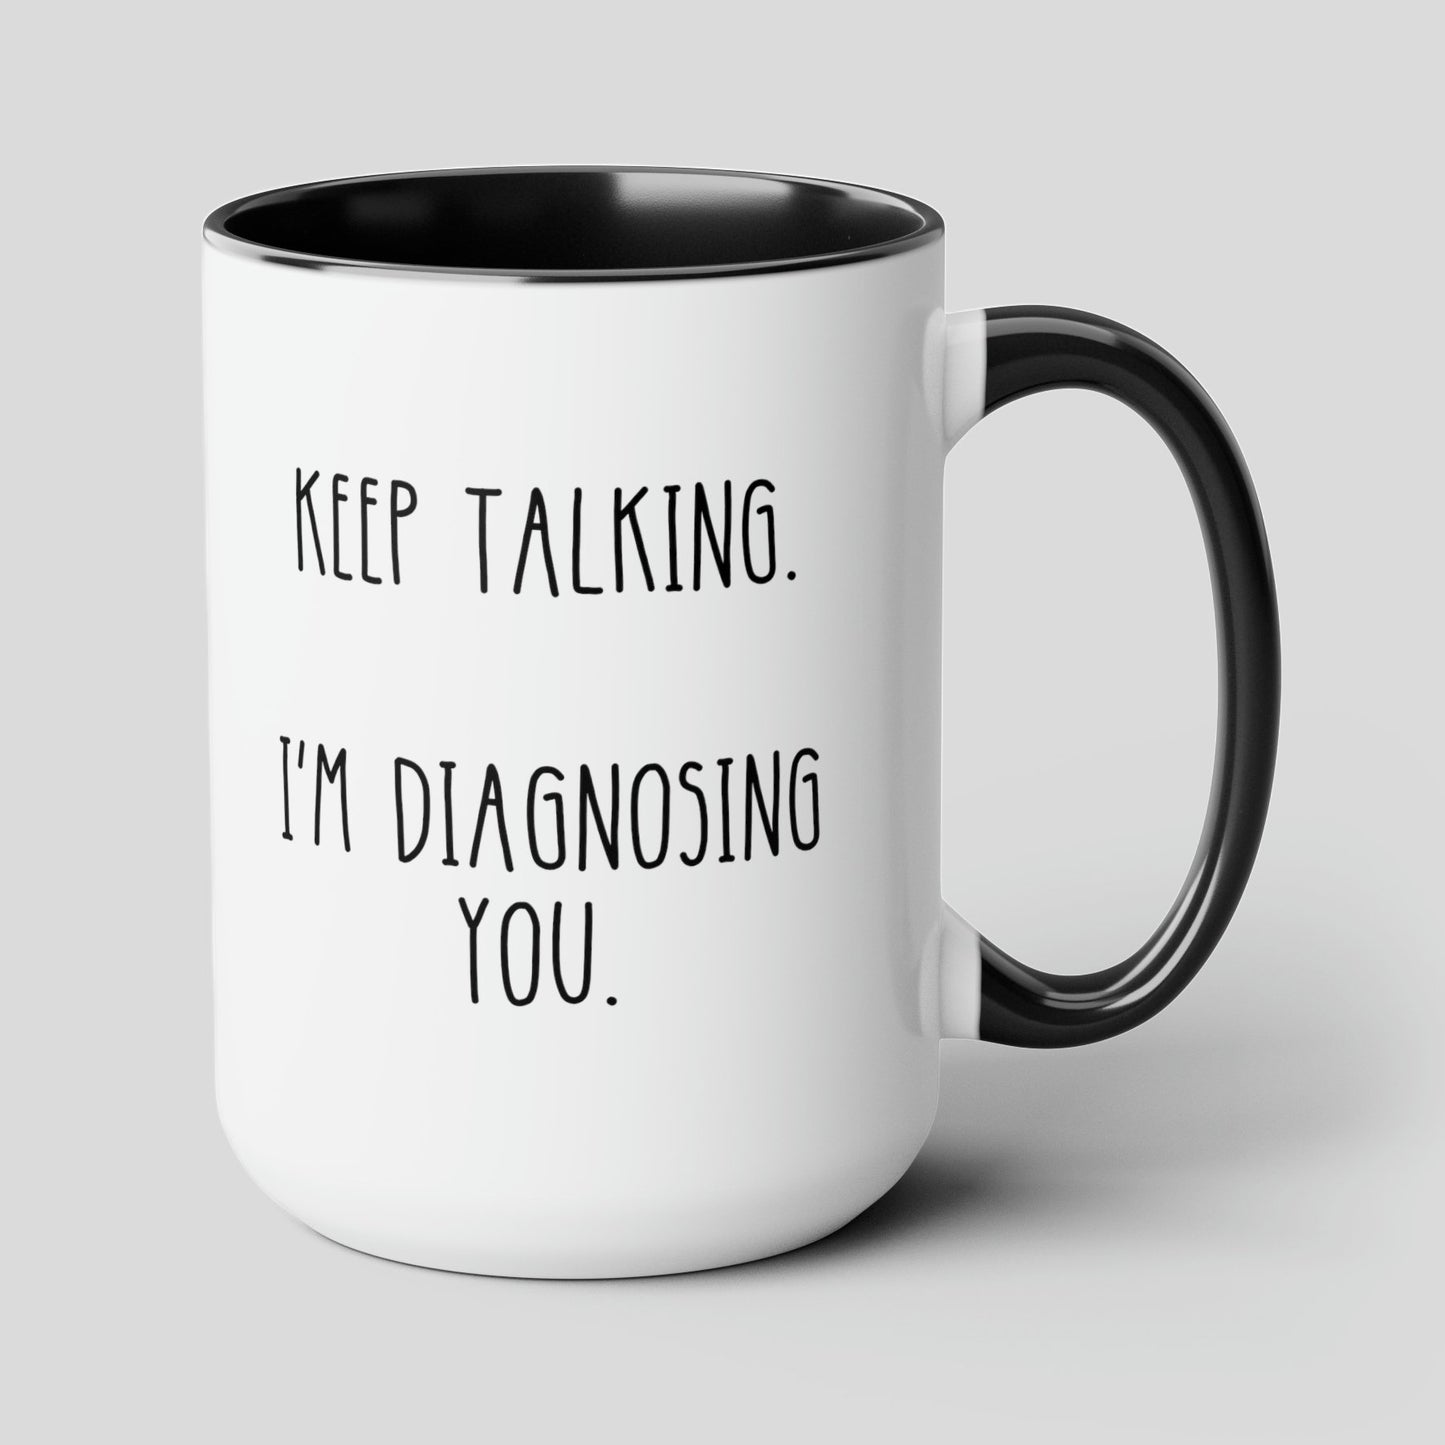 Keep Talking Im Diagnosing You 15oz white Funny large Coffee Mug Psychology Gifts for Psychologist Psychiatrist Therapist Counselor waveywares wavey wares wavywares wavy wares